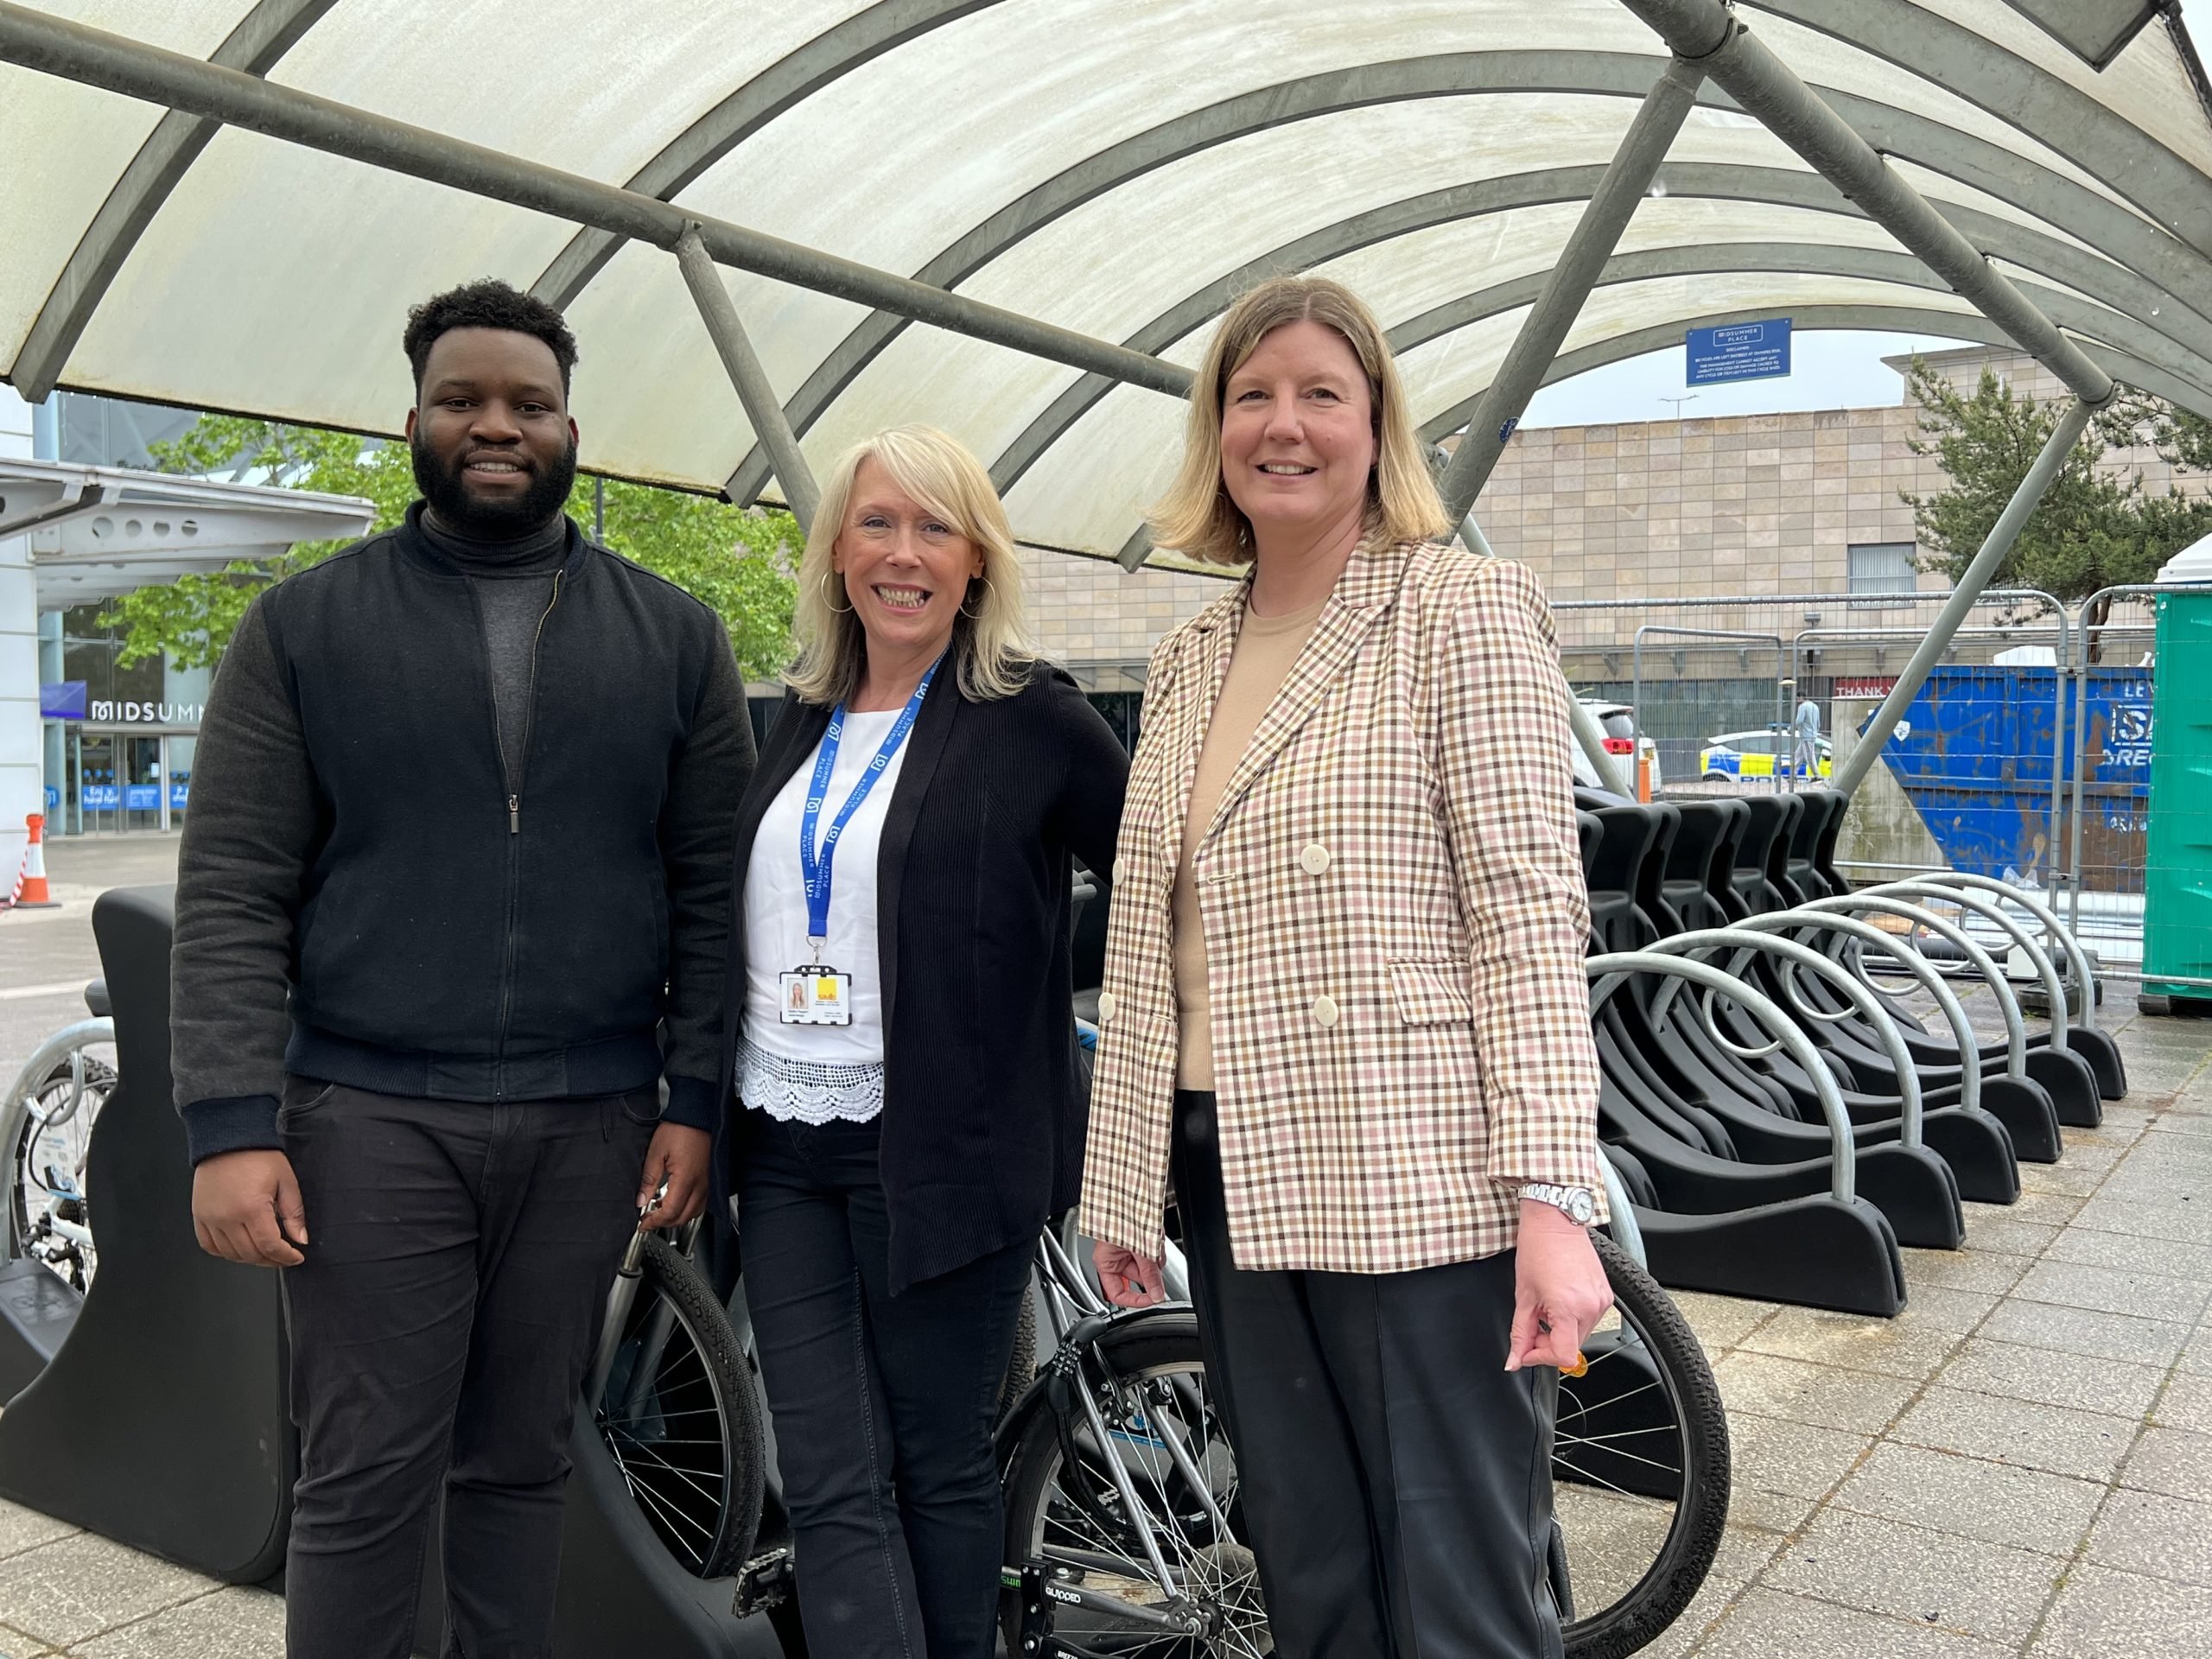 Midsummer Place welcomes new secure cycle parking